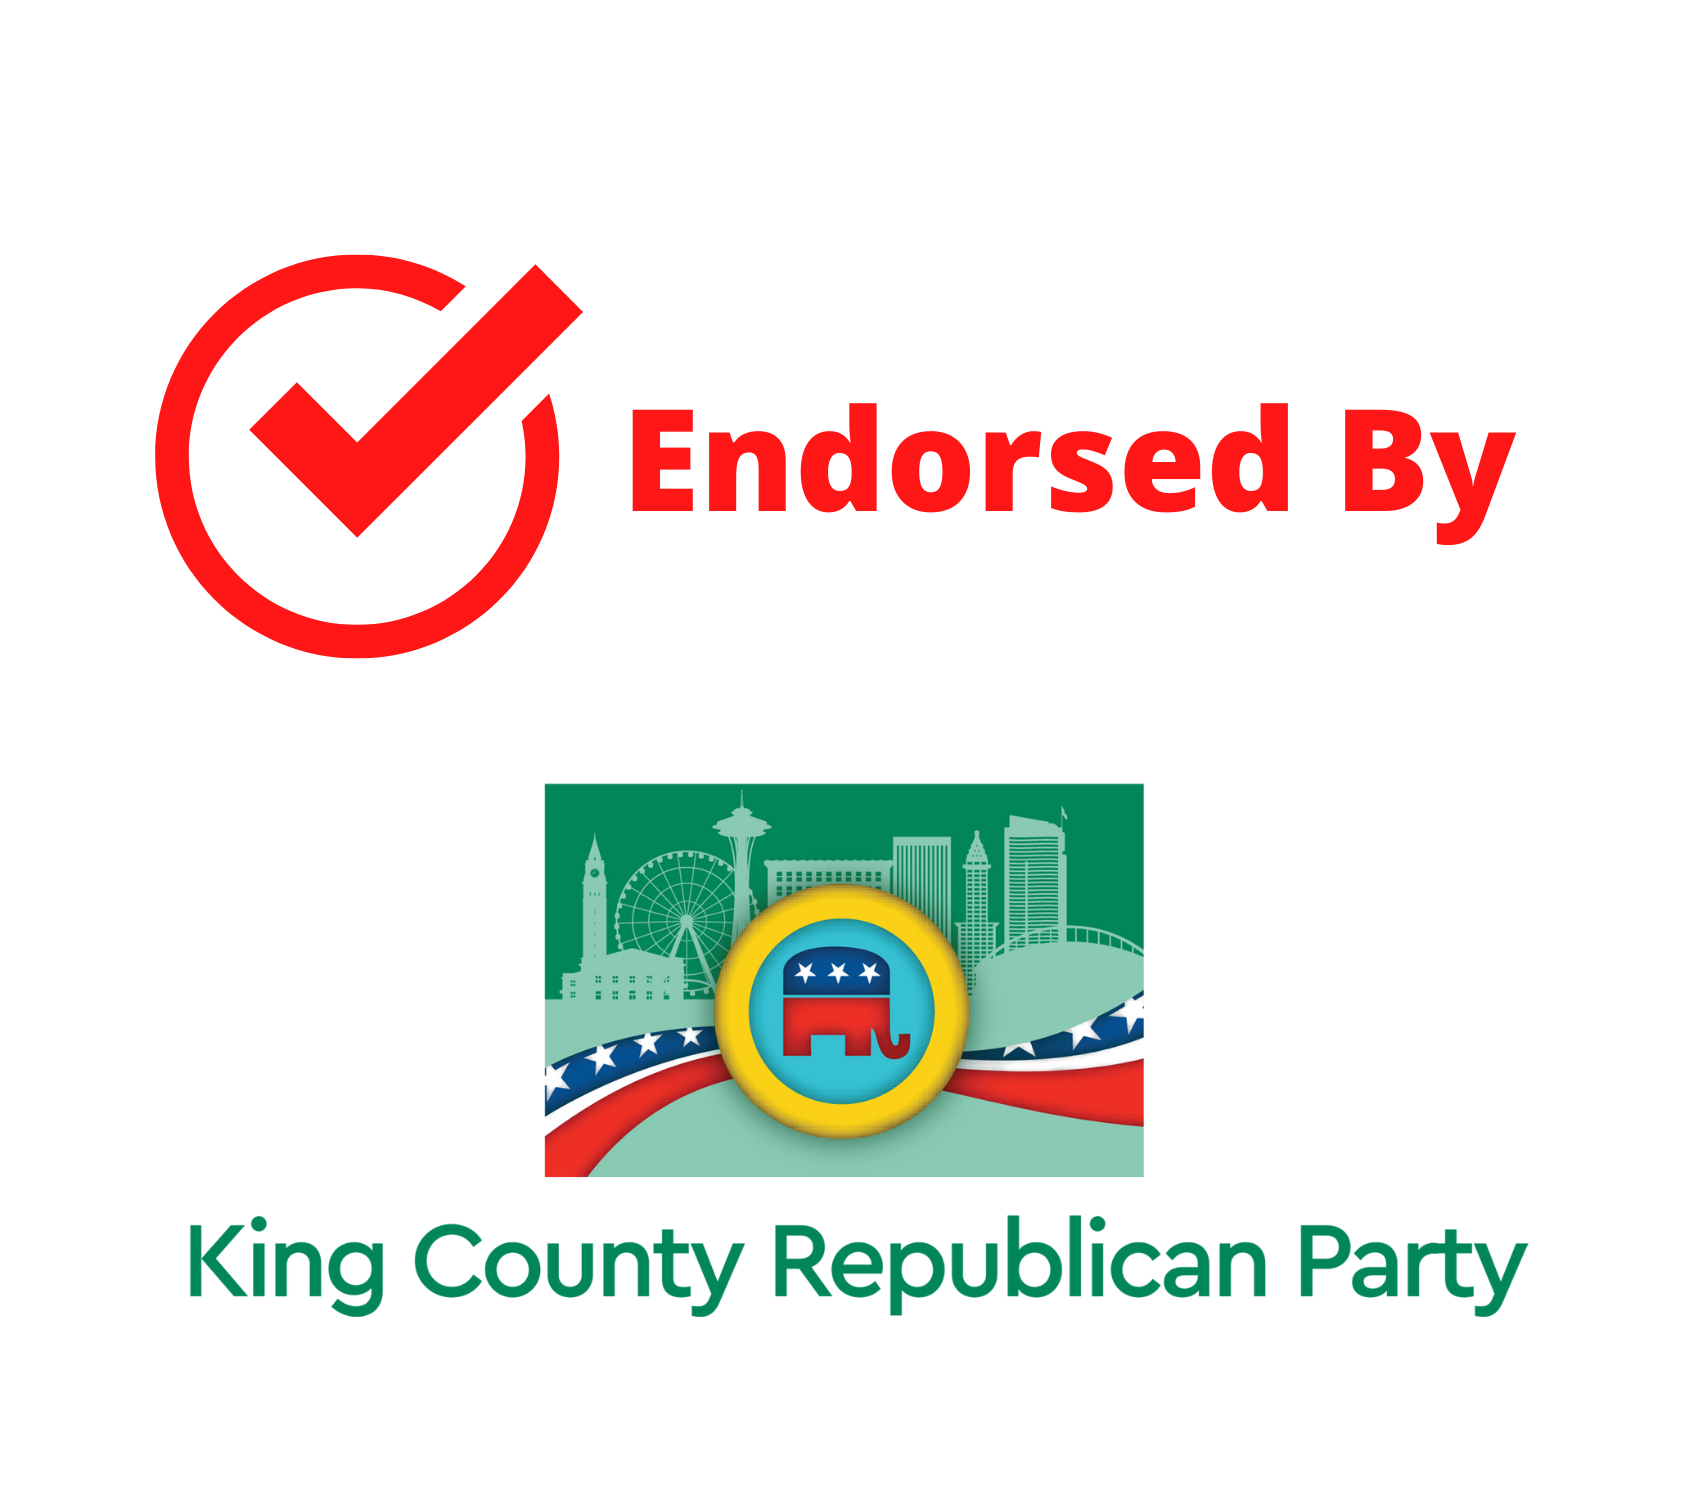 Endorsed by King County Republican Party